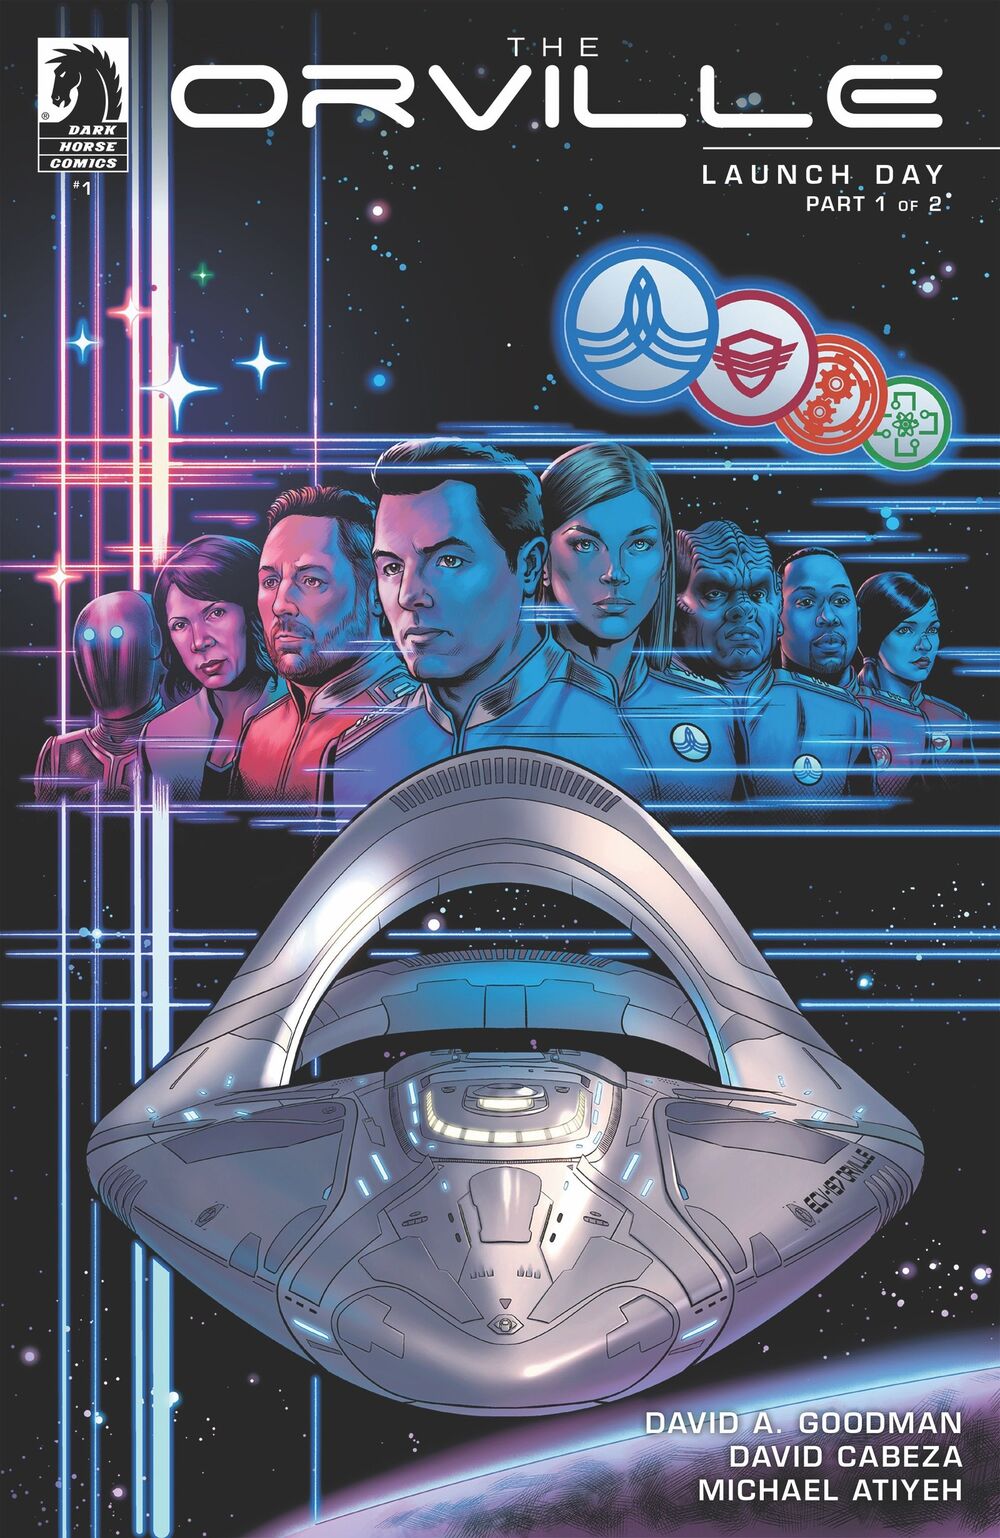 The-Orville-Season-2.5-Launch-Day-Part-1-Cover.jpg  by avp60685